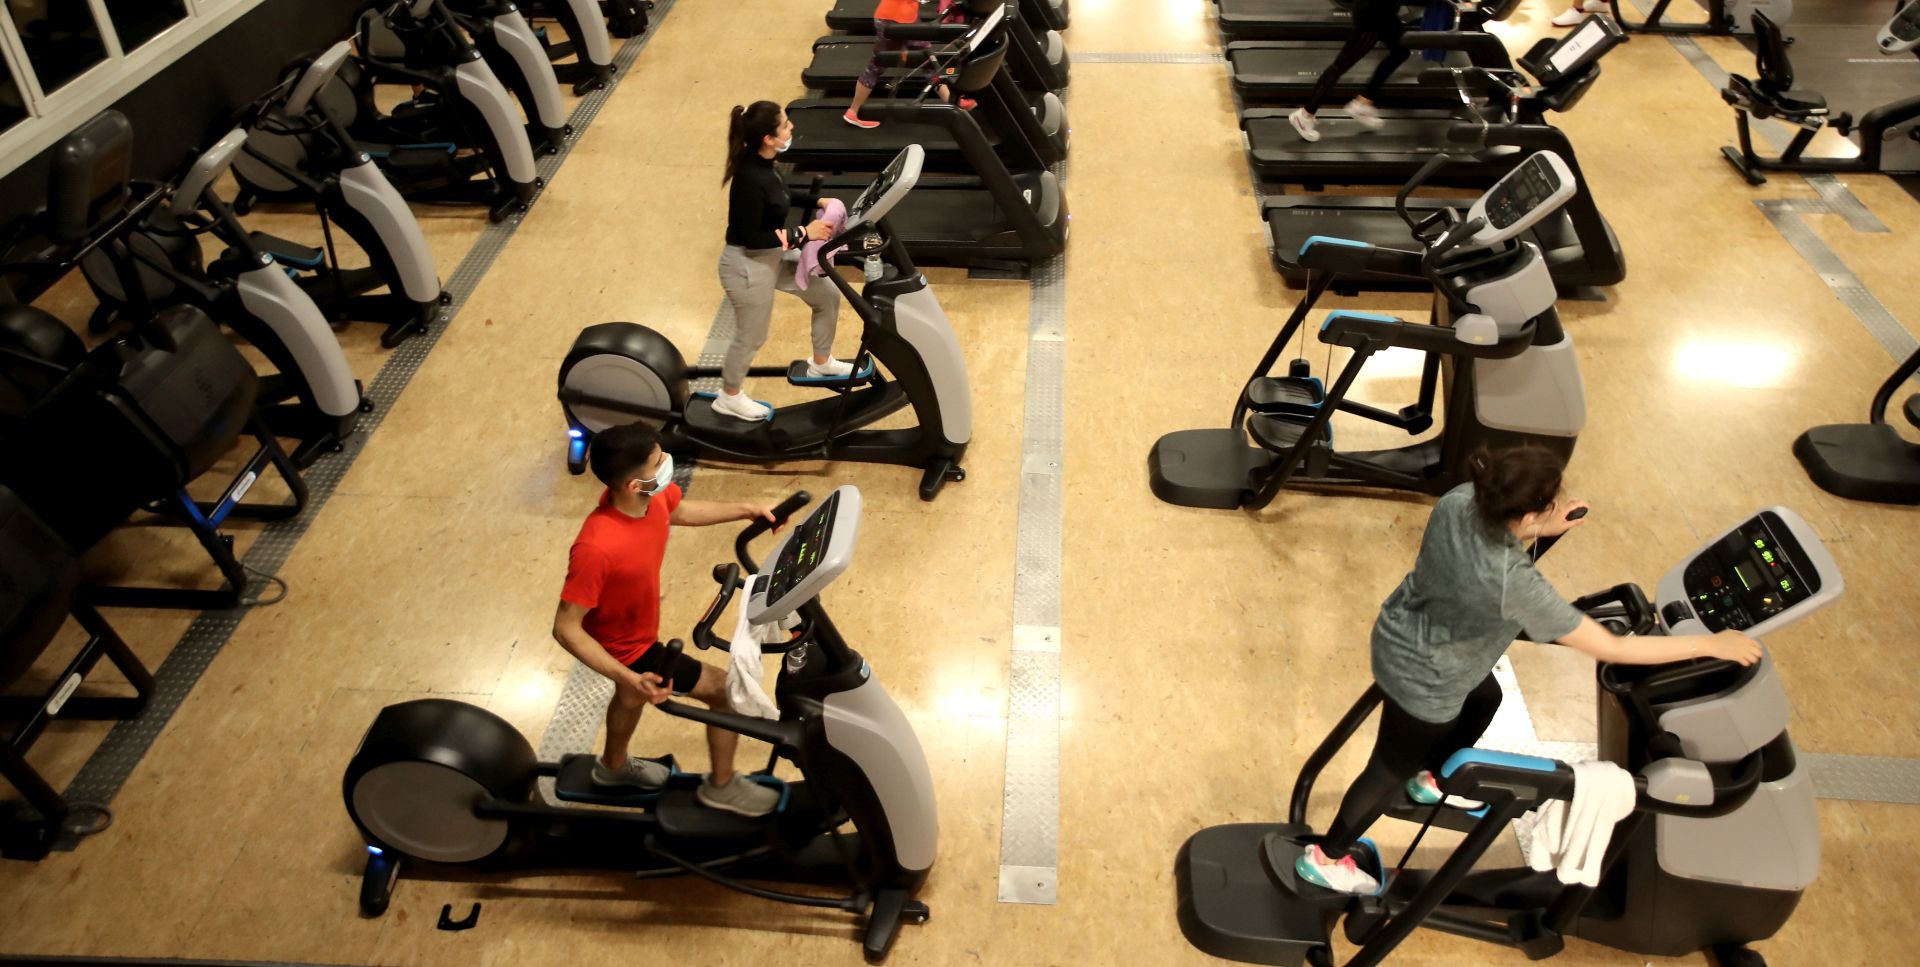 epa08413649 Customers exercise at the McFIT gym in Cologne, Germany, 10 May 2020. Due to the gradual relaxation of the lockdown restrictions imposed in a bid to slow down the spread of the pandemic COVID-19 disease caused by the SARS-CoV-2 coronavirus, gyms in North Rhine-Westphalia have started reopening, though with extra hygiene precautions.  EPA/FRIEDEMANN VOGEL